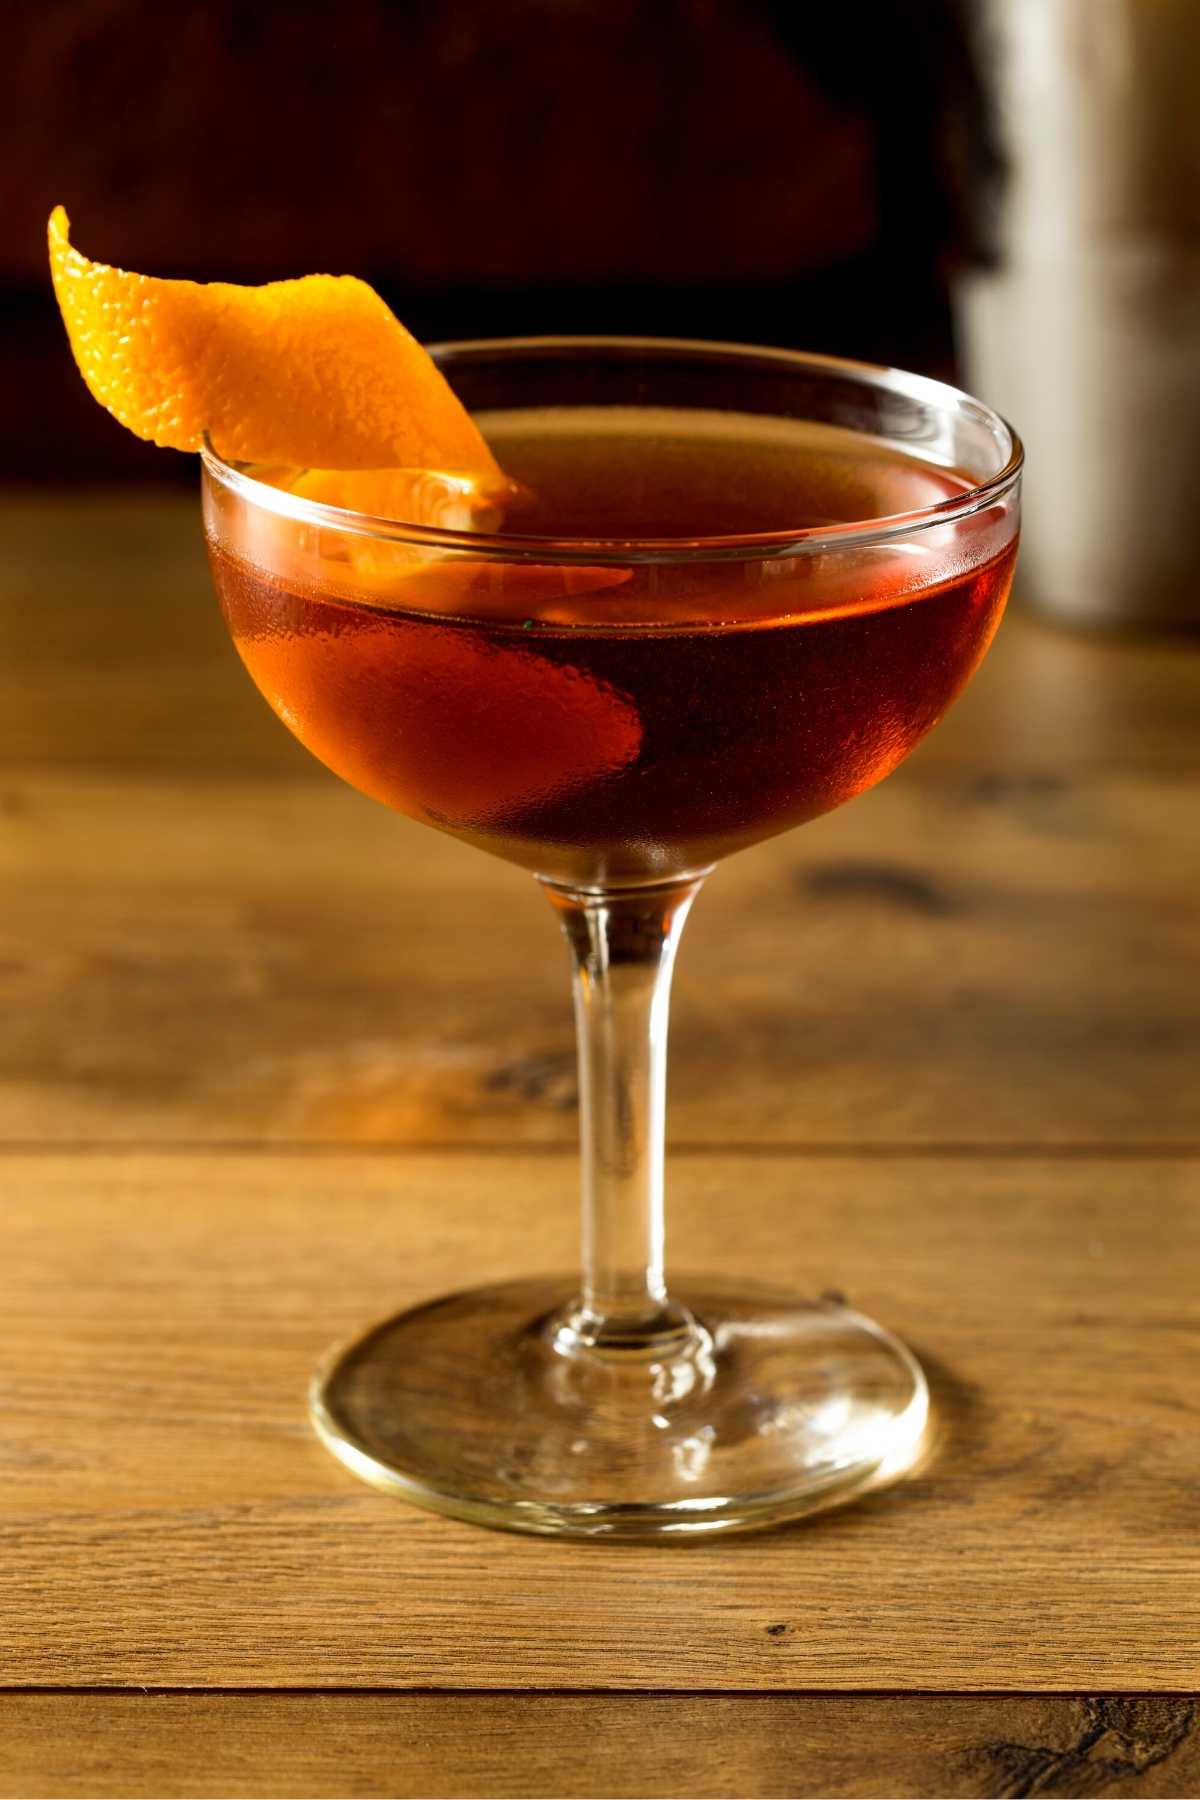 If you went back in time and visited any trendy bar at the turn of the 20th century, you’d be sure to find a Hanky Panky Cocktail on the menu. It’s classic, sophisticated and super easy to recreate at home.